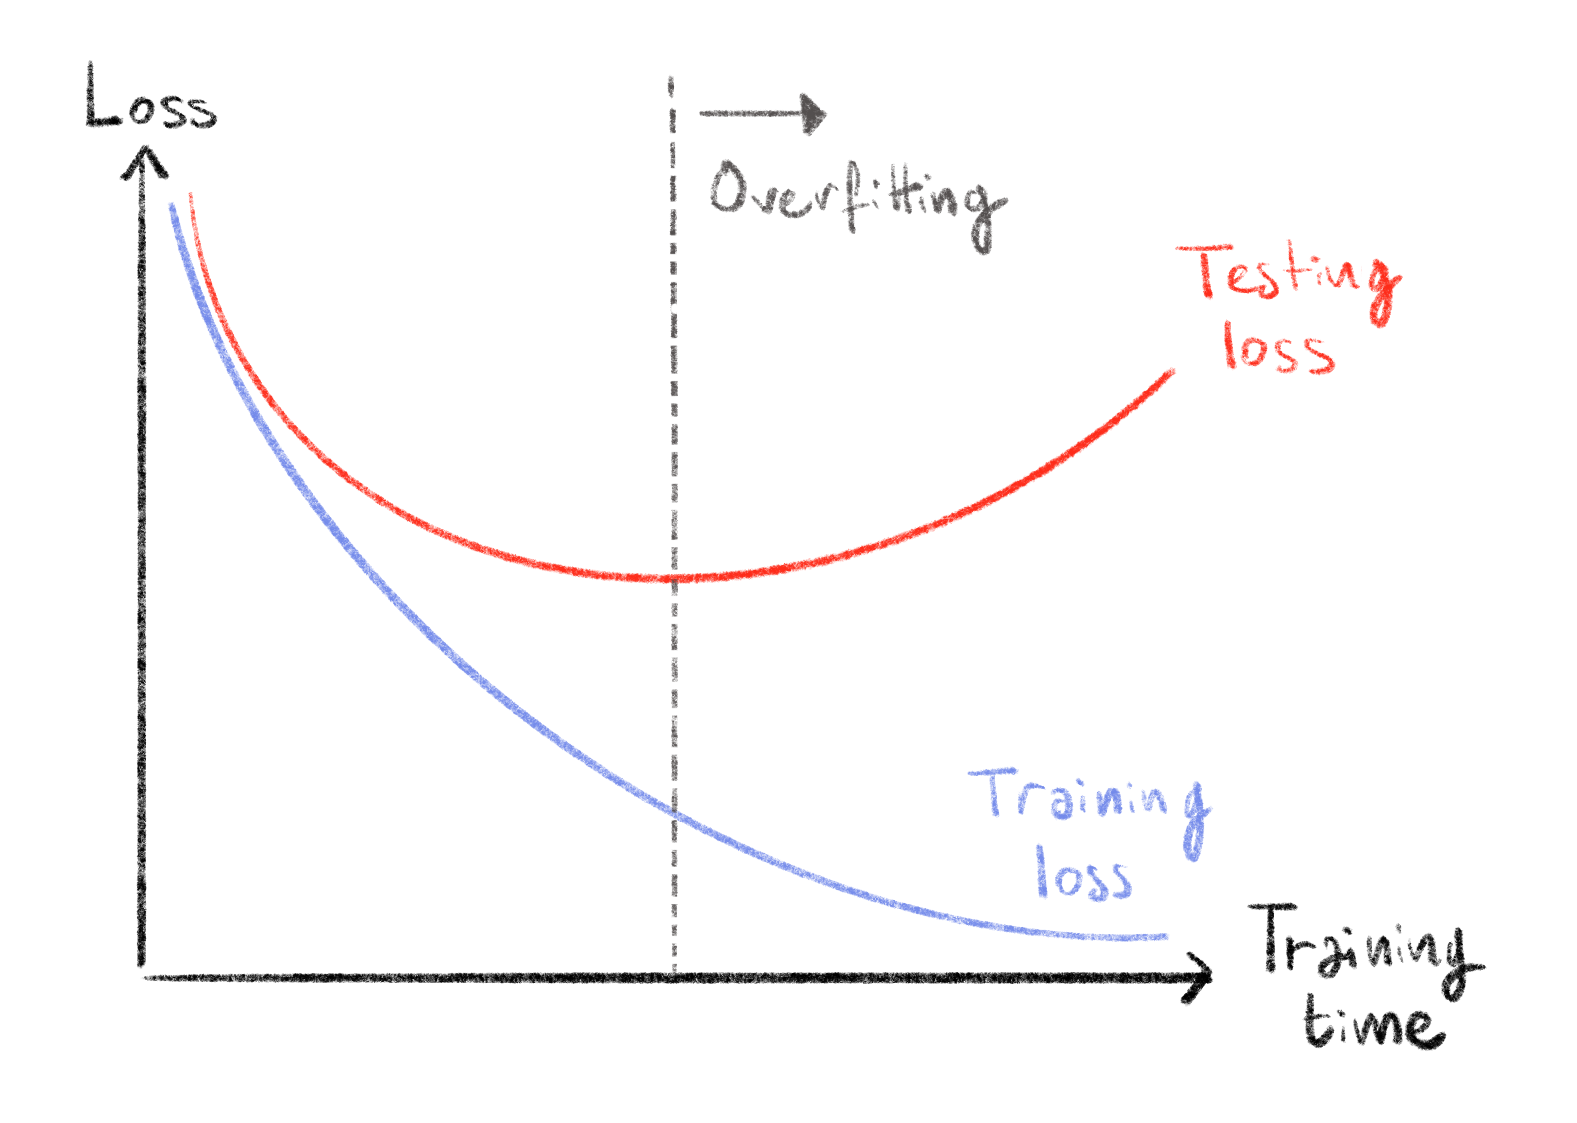 **Overfitting behaviour in loss functions.**  
The two curves show how the loss calculated on the training set (blue) and the testing set (red) evolve as training time increases. At first both decrease showing that the model learns informative and generalizable features. At some point, training loss keeps decreasing and testing loss increases, meaning that the model is learning over-specific features on the training set and is no longer generalizable: it is overfitting.